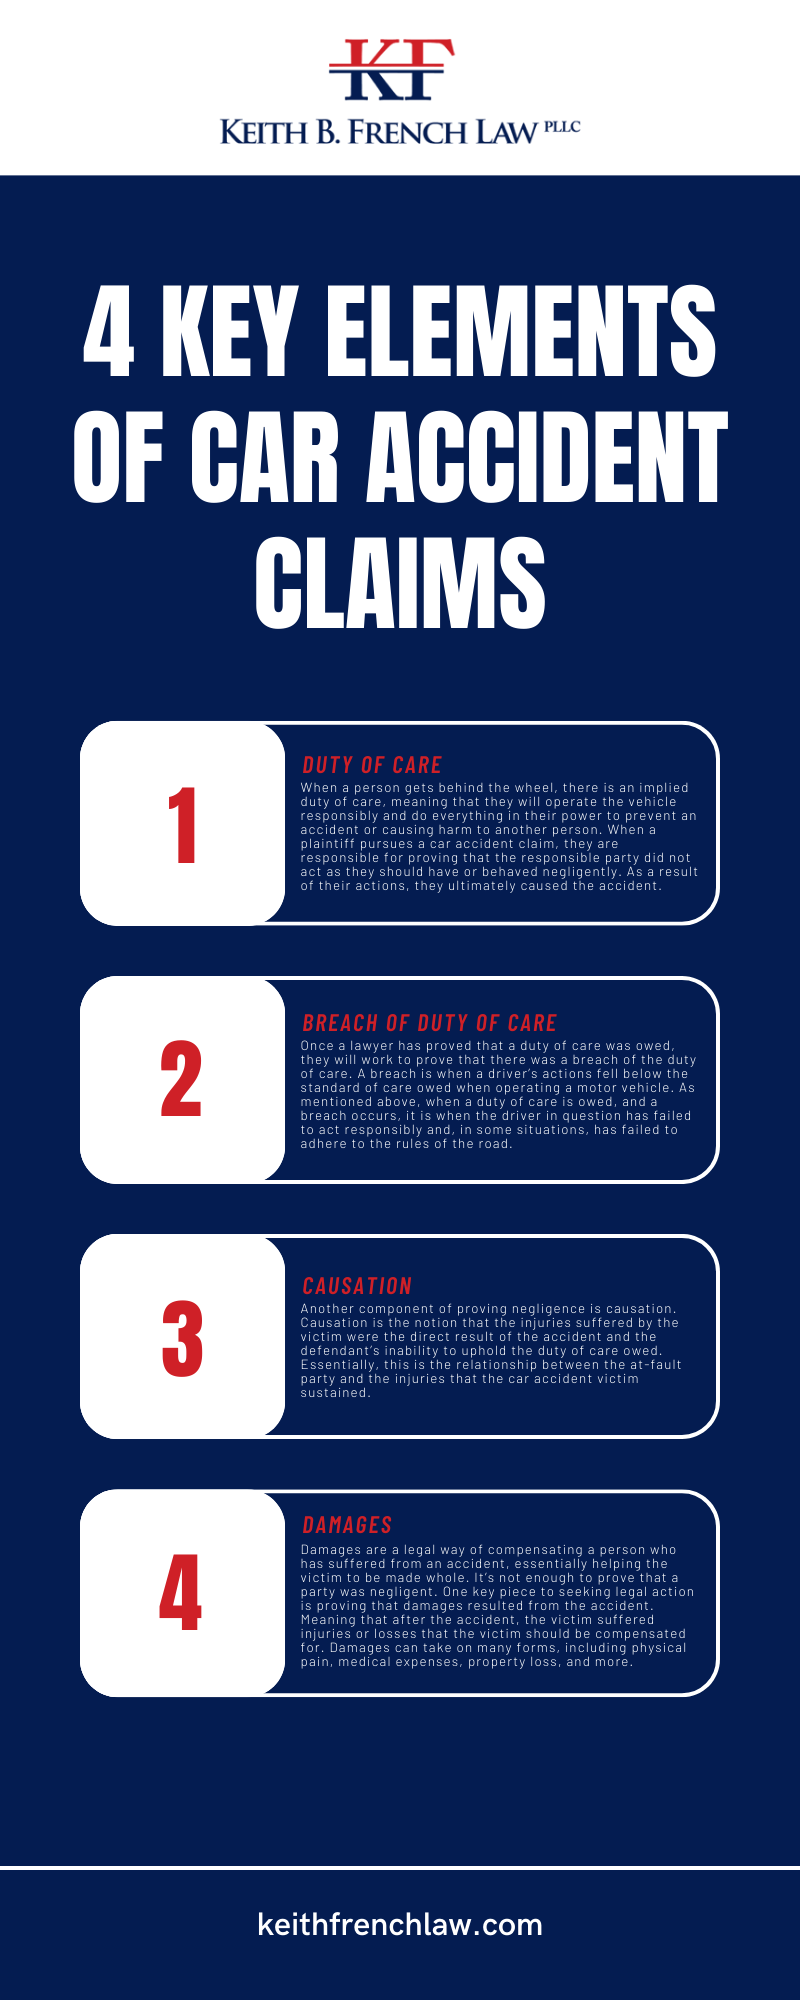 4 Key Elements of Car Accident Claims Infographic